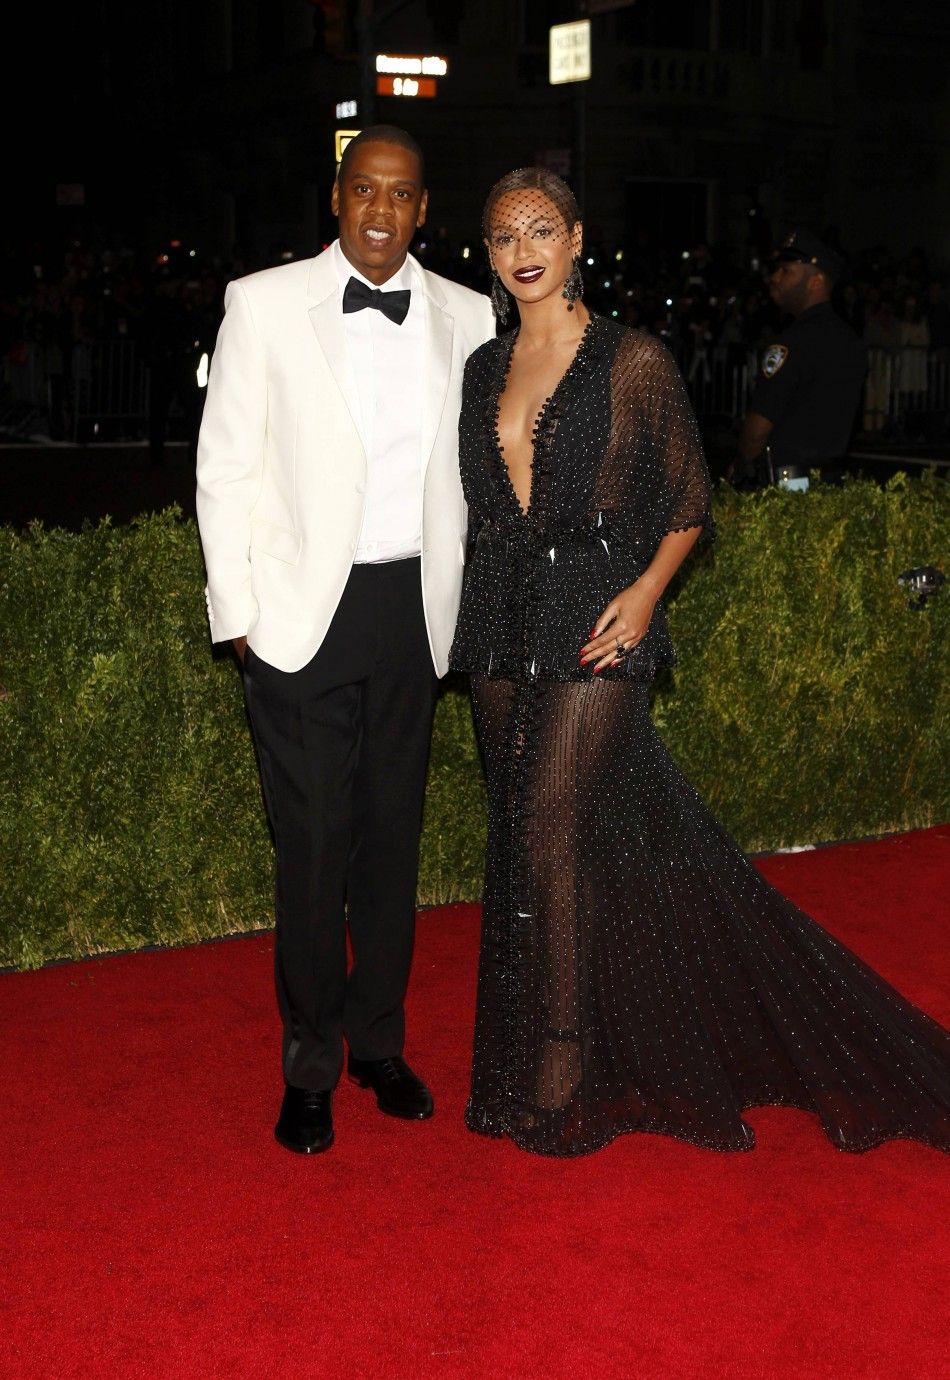 Beyonce and her husband Jay-Z arrive at the Metropolitan Museum of Art Costume Institute Gala Benefit celebrating the opening of quotCharles James Beyond Fashionquot in Upper Manhattan, New York